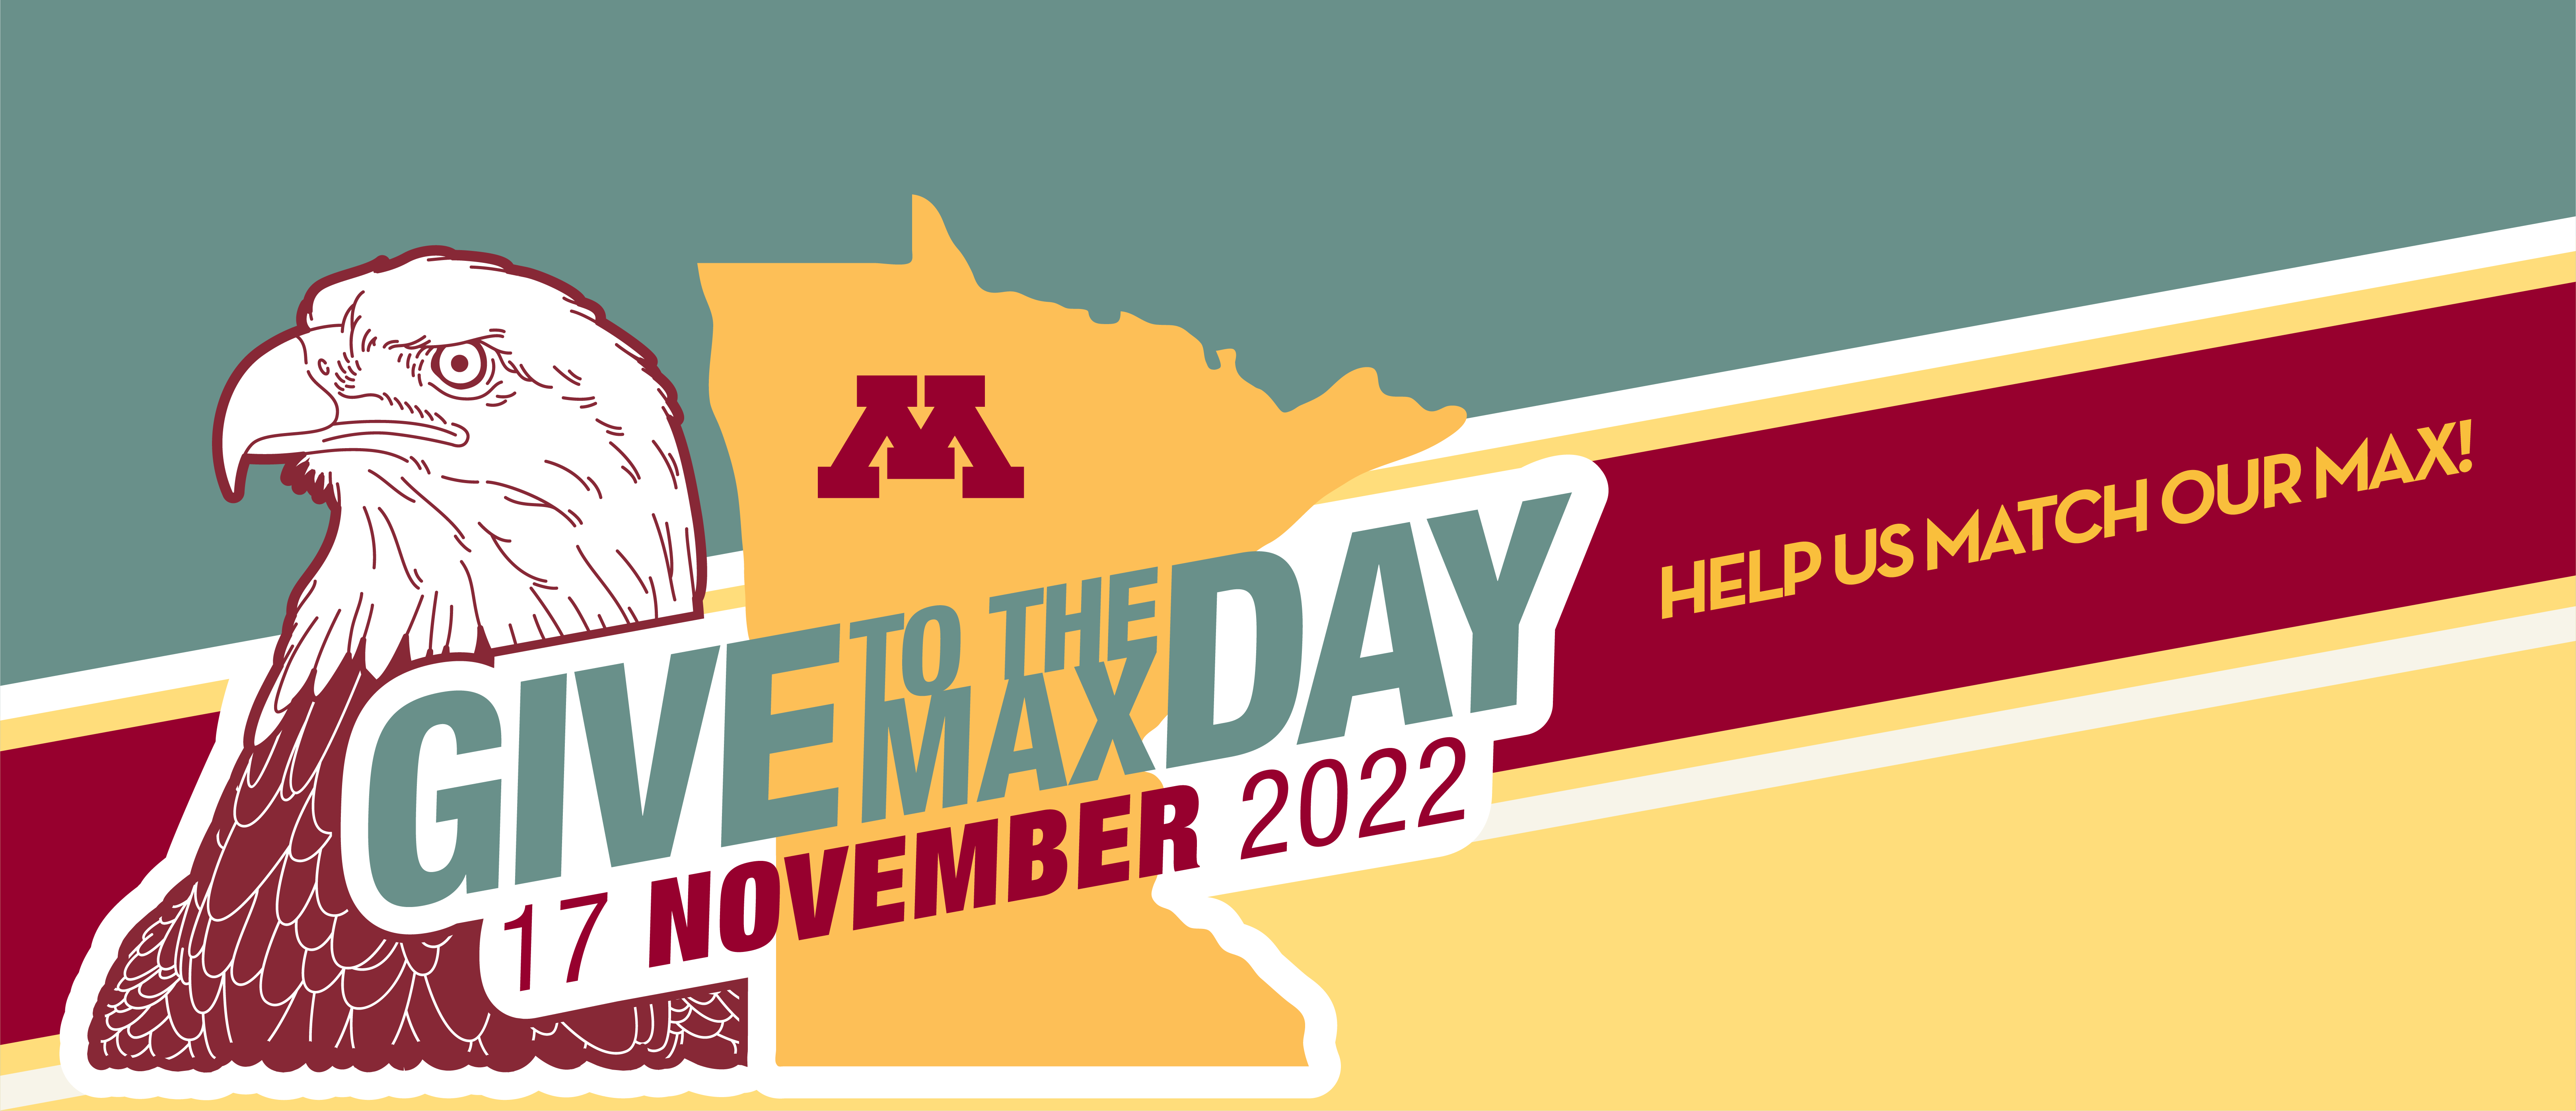 "give to the max day 17 november 2022. help us match our max"